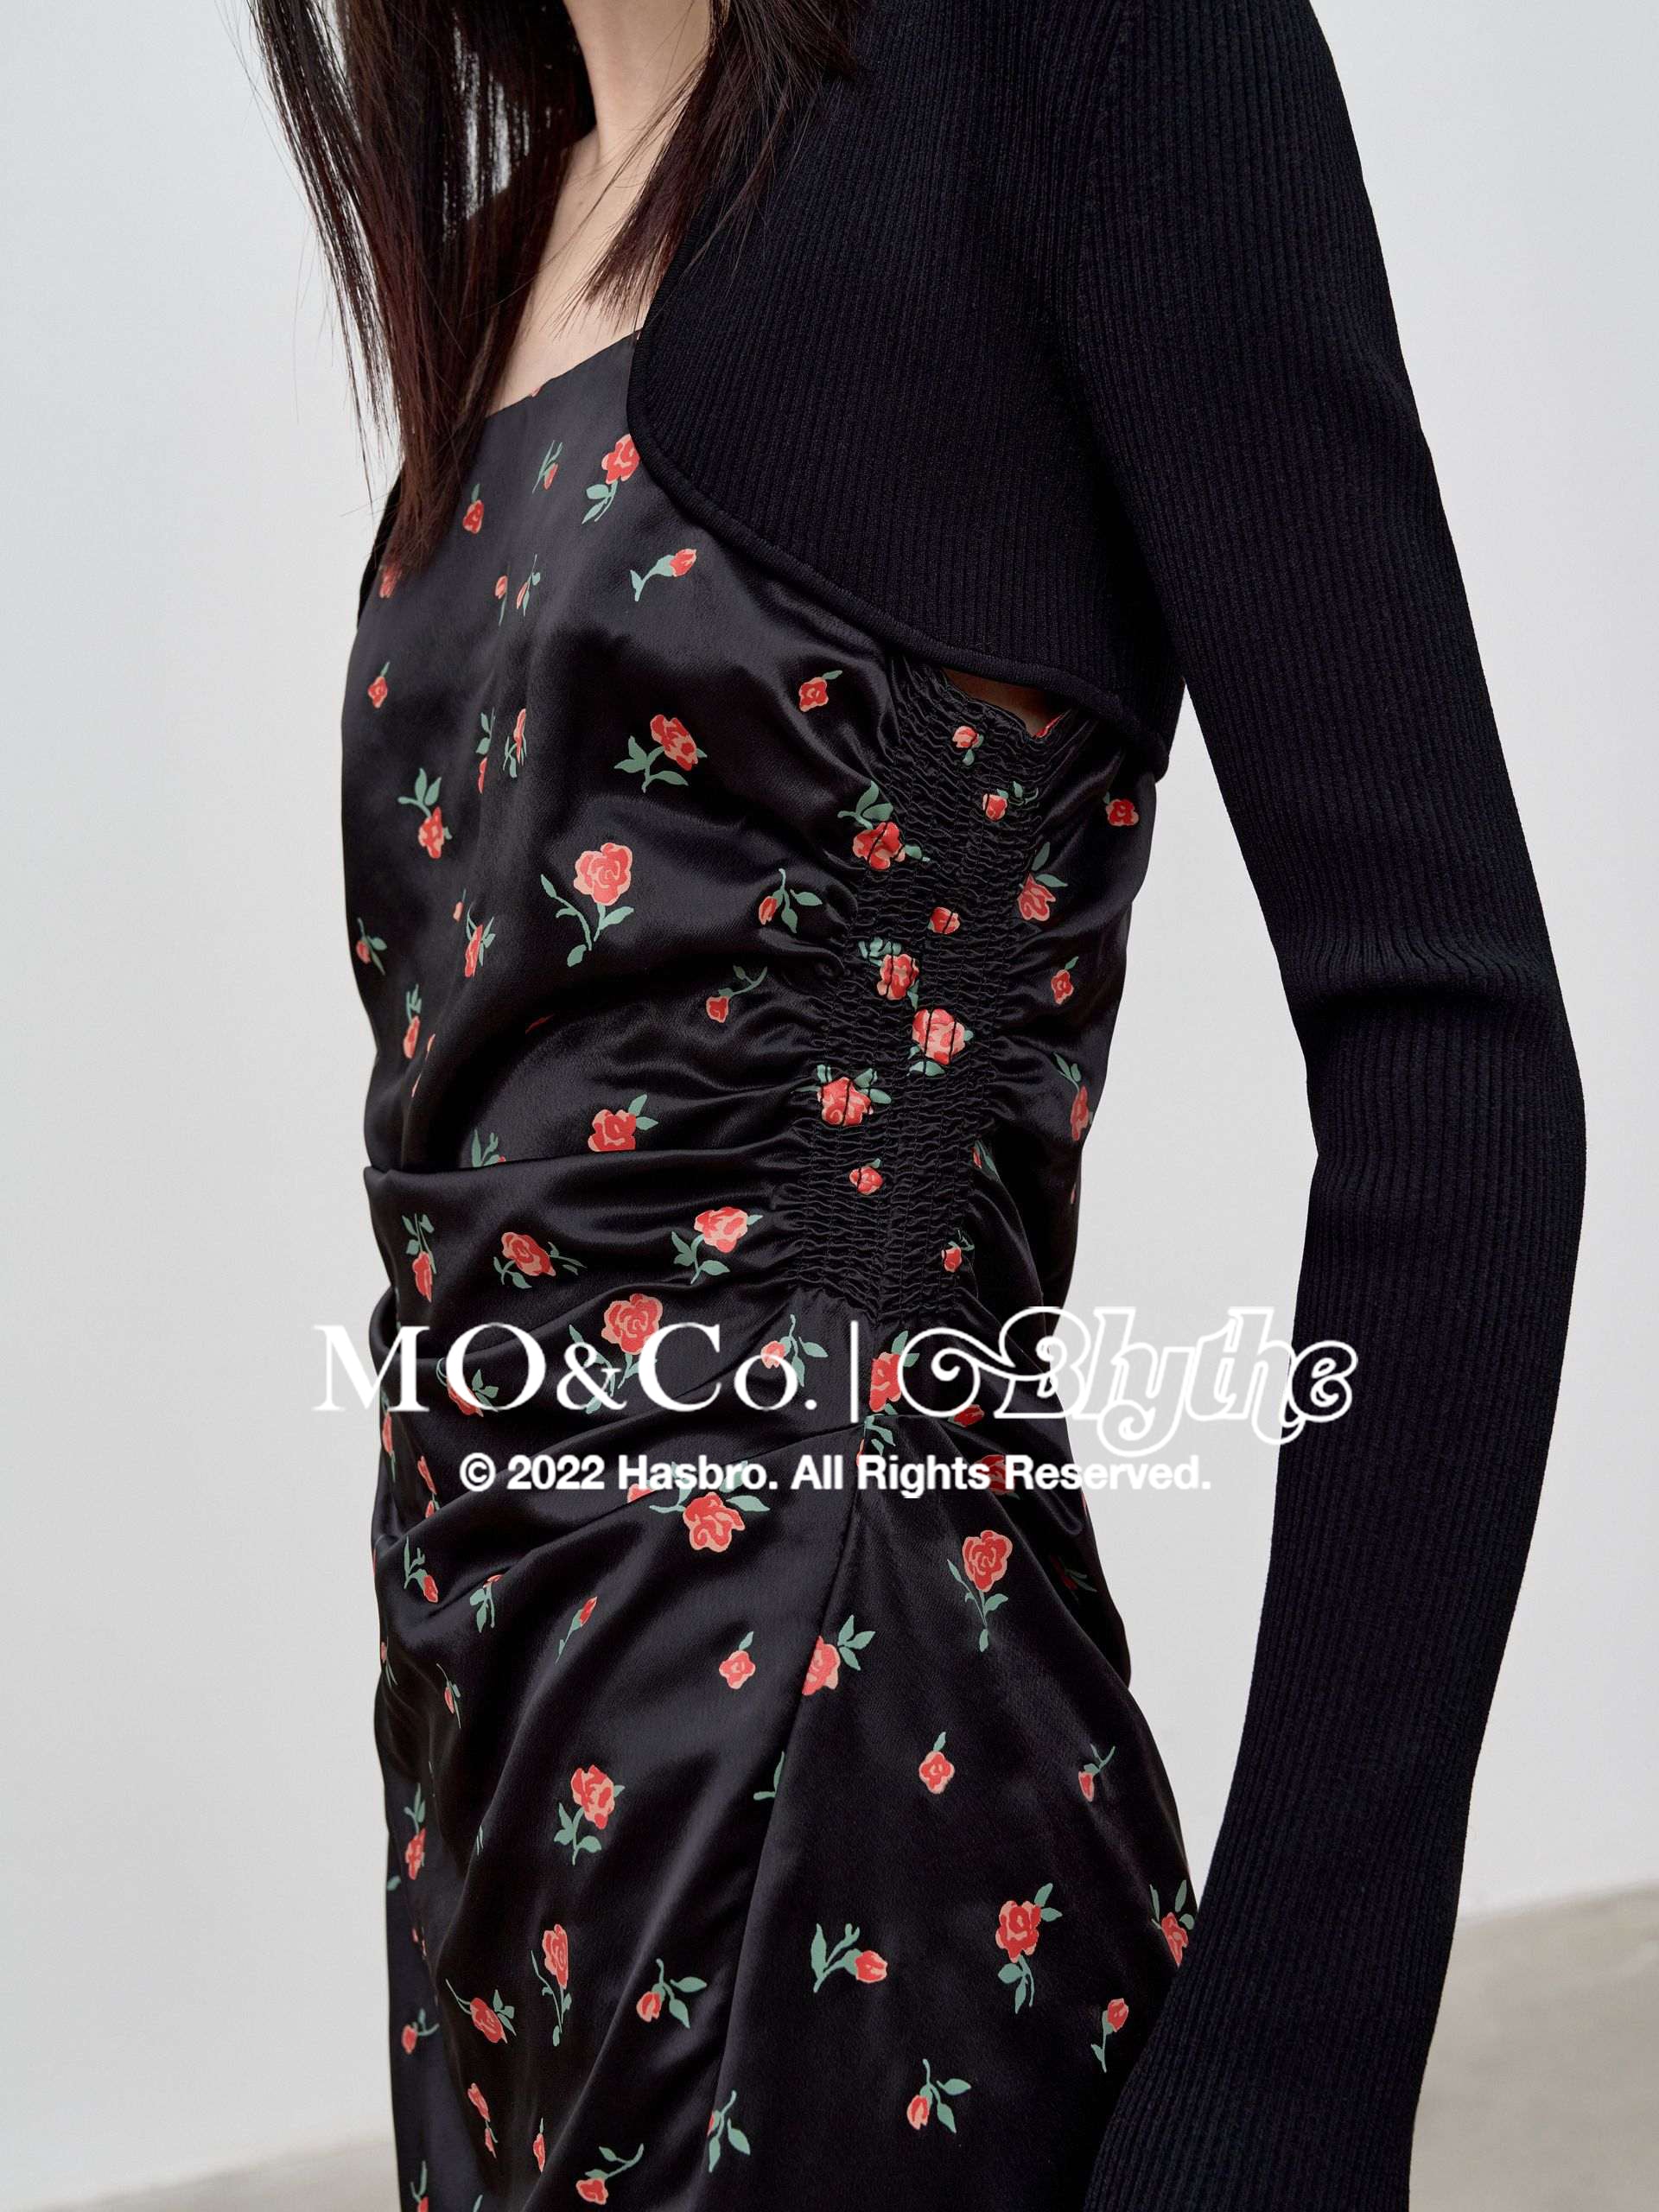 MO&Co.｜Blythe Collaboration Irregular Panel Dress Fitted Casual Square Neck  Black Dress